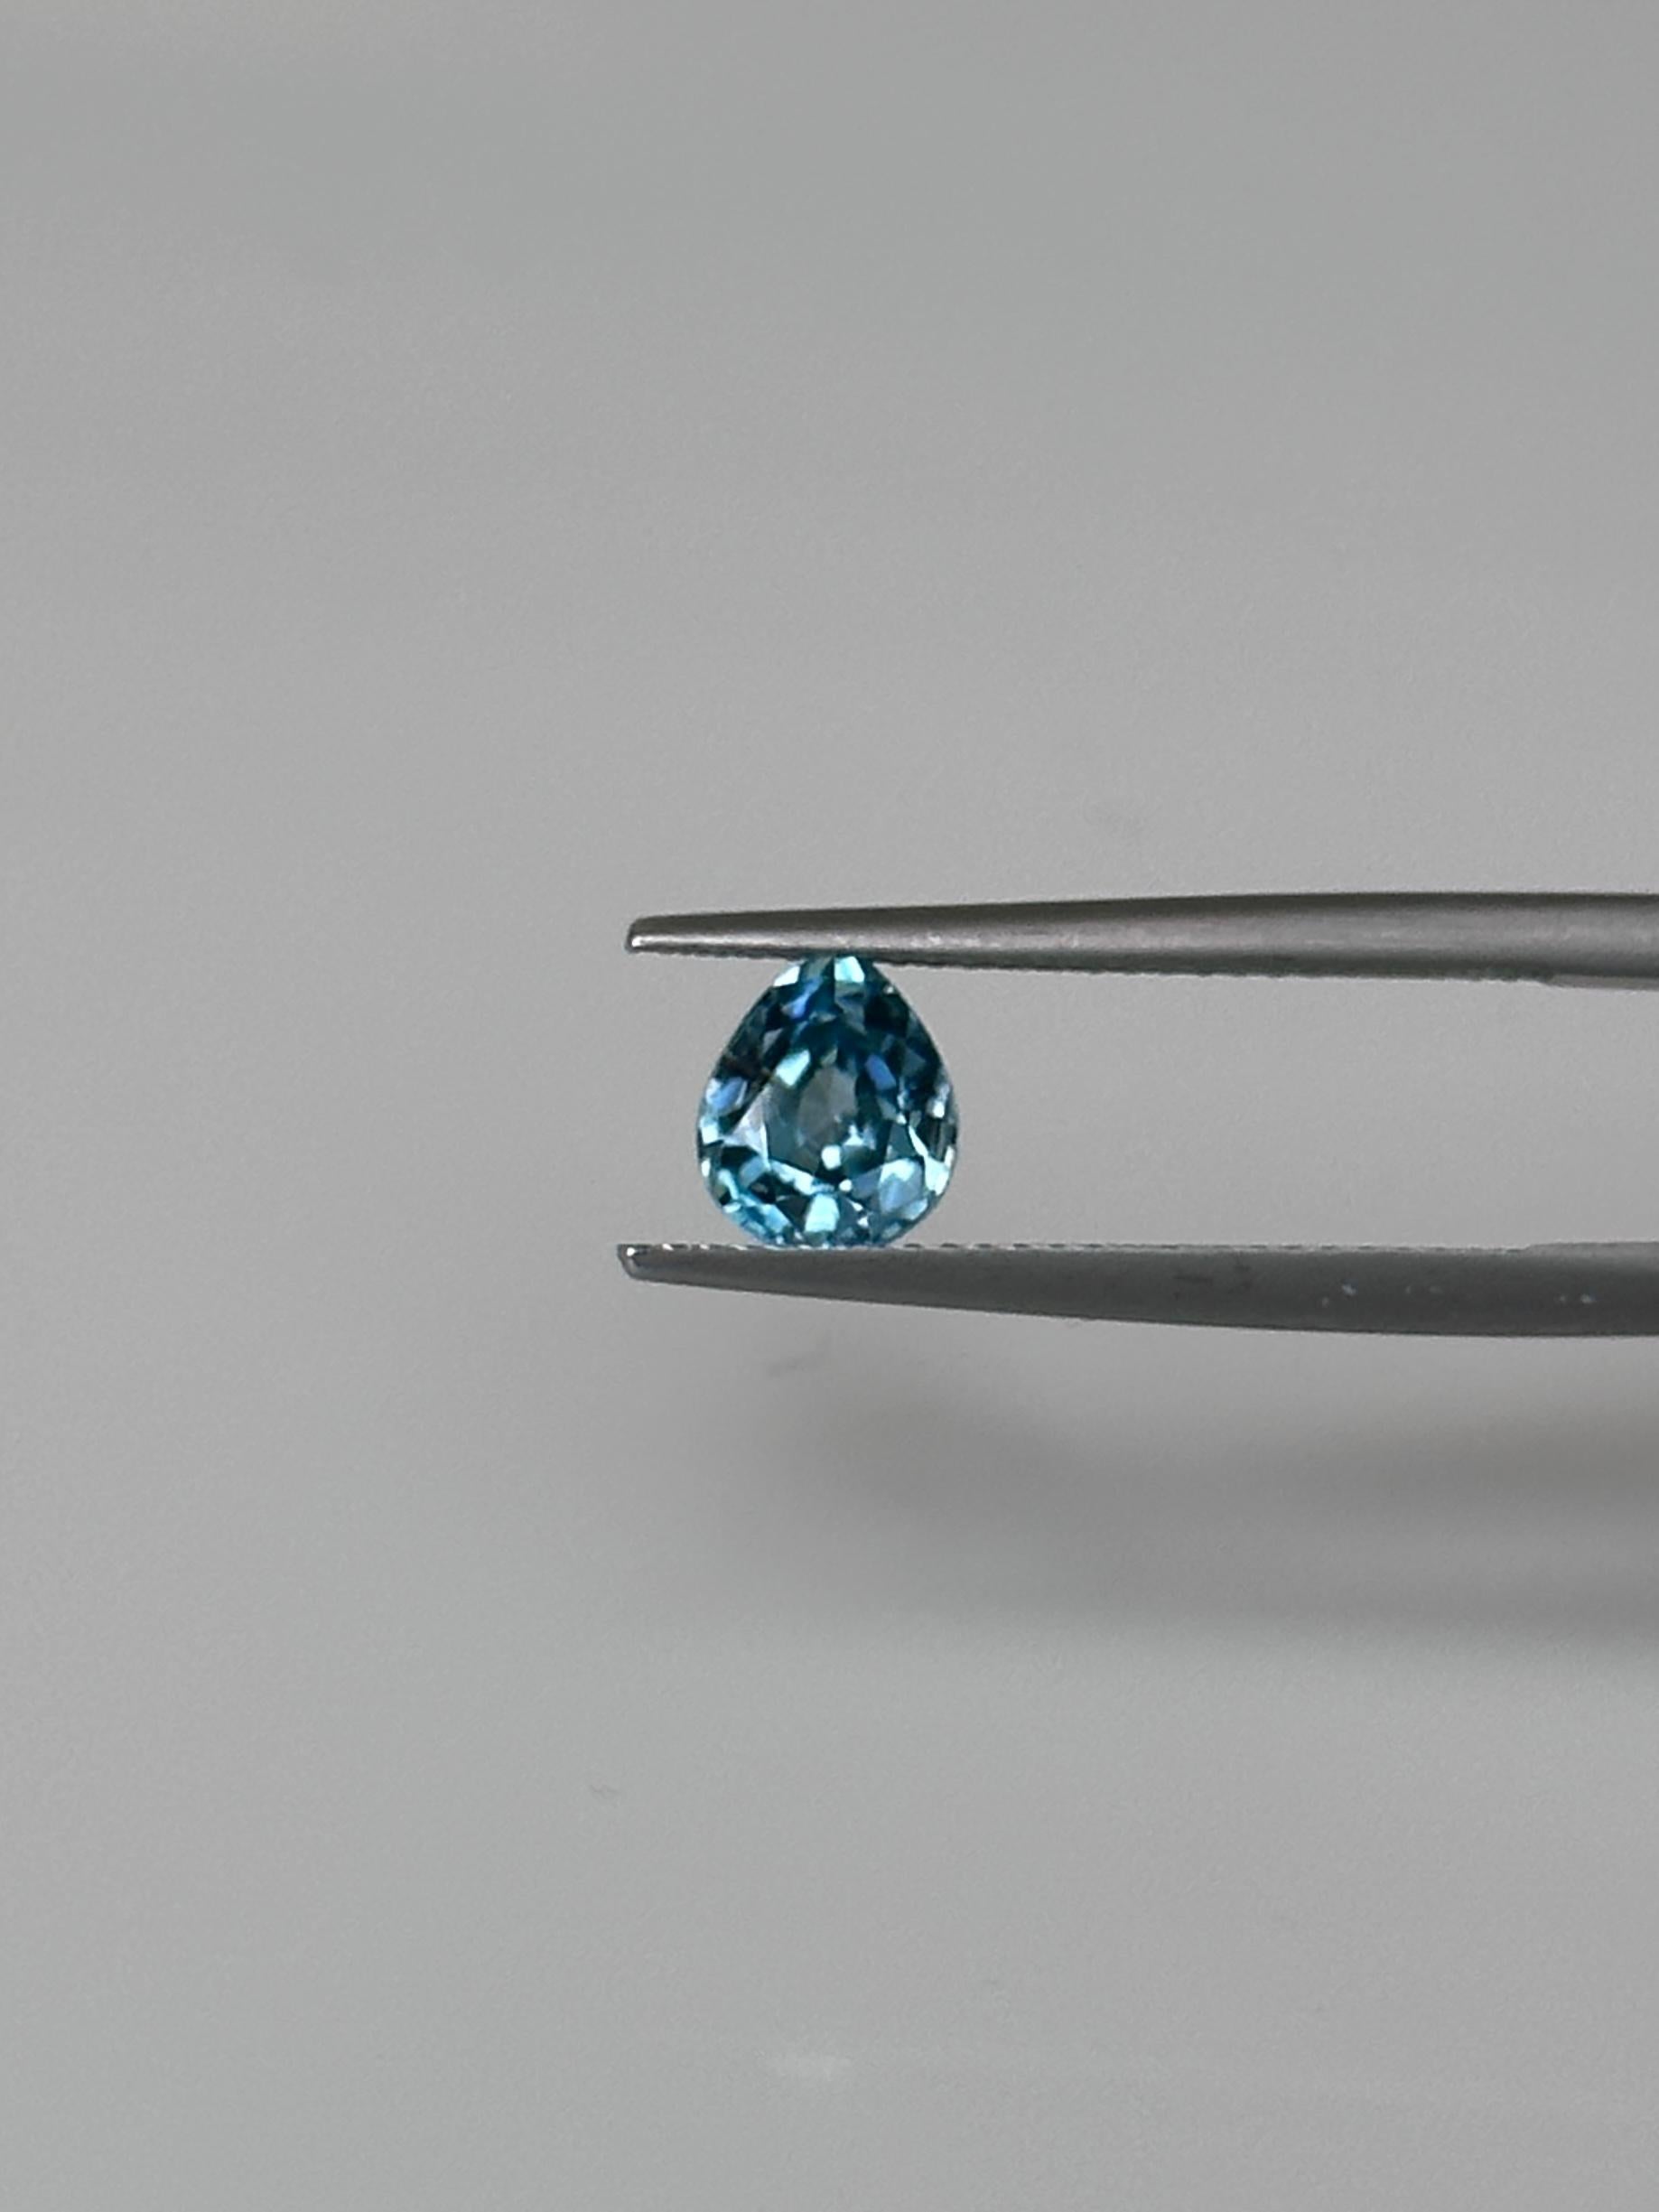 A beautiful sparkling Pear shaped 'Metallic Blue' Zircon from Ratanakiri, Cambodia.

This 1.56 carat Blue Zircon has a gray tinge with a dusky blue color. Giving it the 